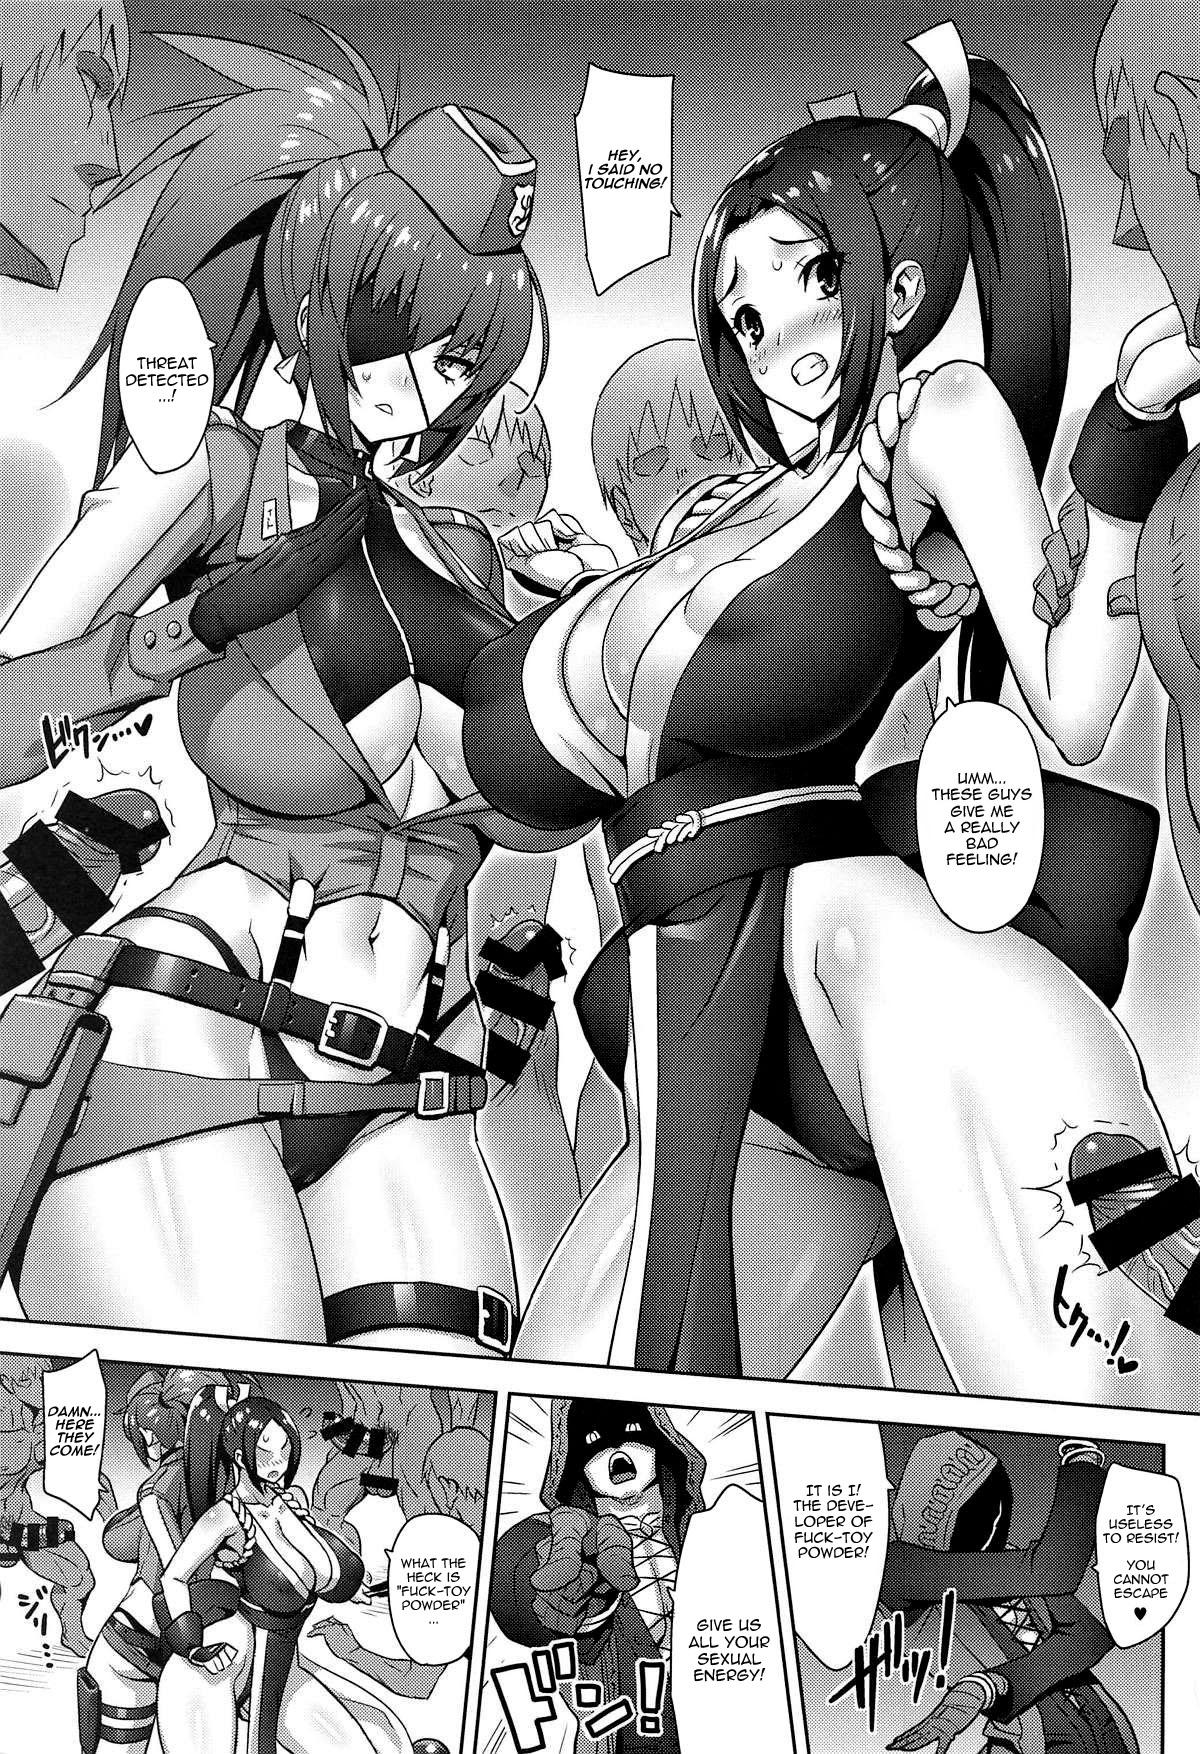 Family Porn JIGGLING FIGHTERS - King of fighters Amatuer - Page 2